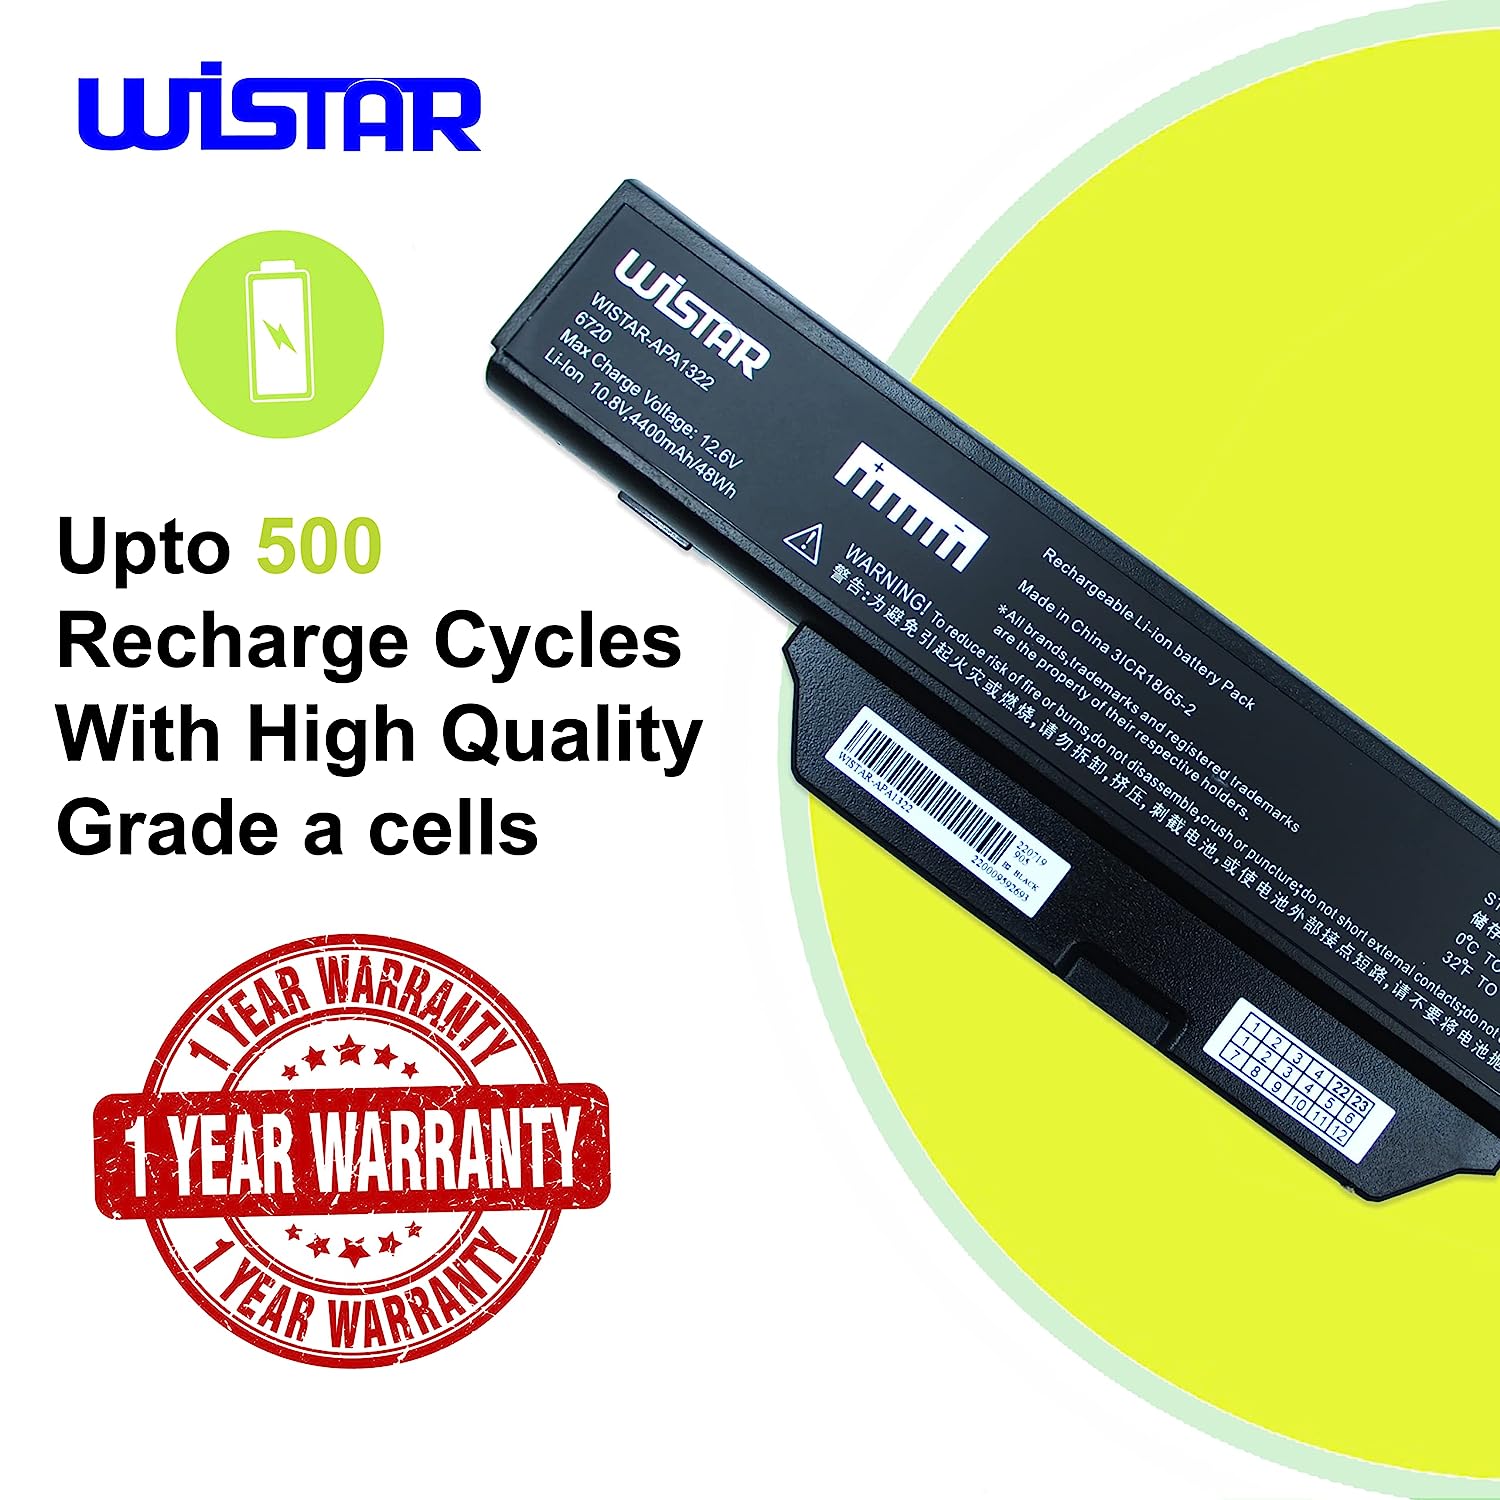 WISTAR Laptop Battery Compatible for HP COMPAQ 550 610 615 HP Business Notebook 6720S 6720S/CT 6730S 6730S/CT 6735S 6820S 6830S